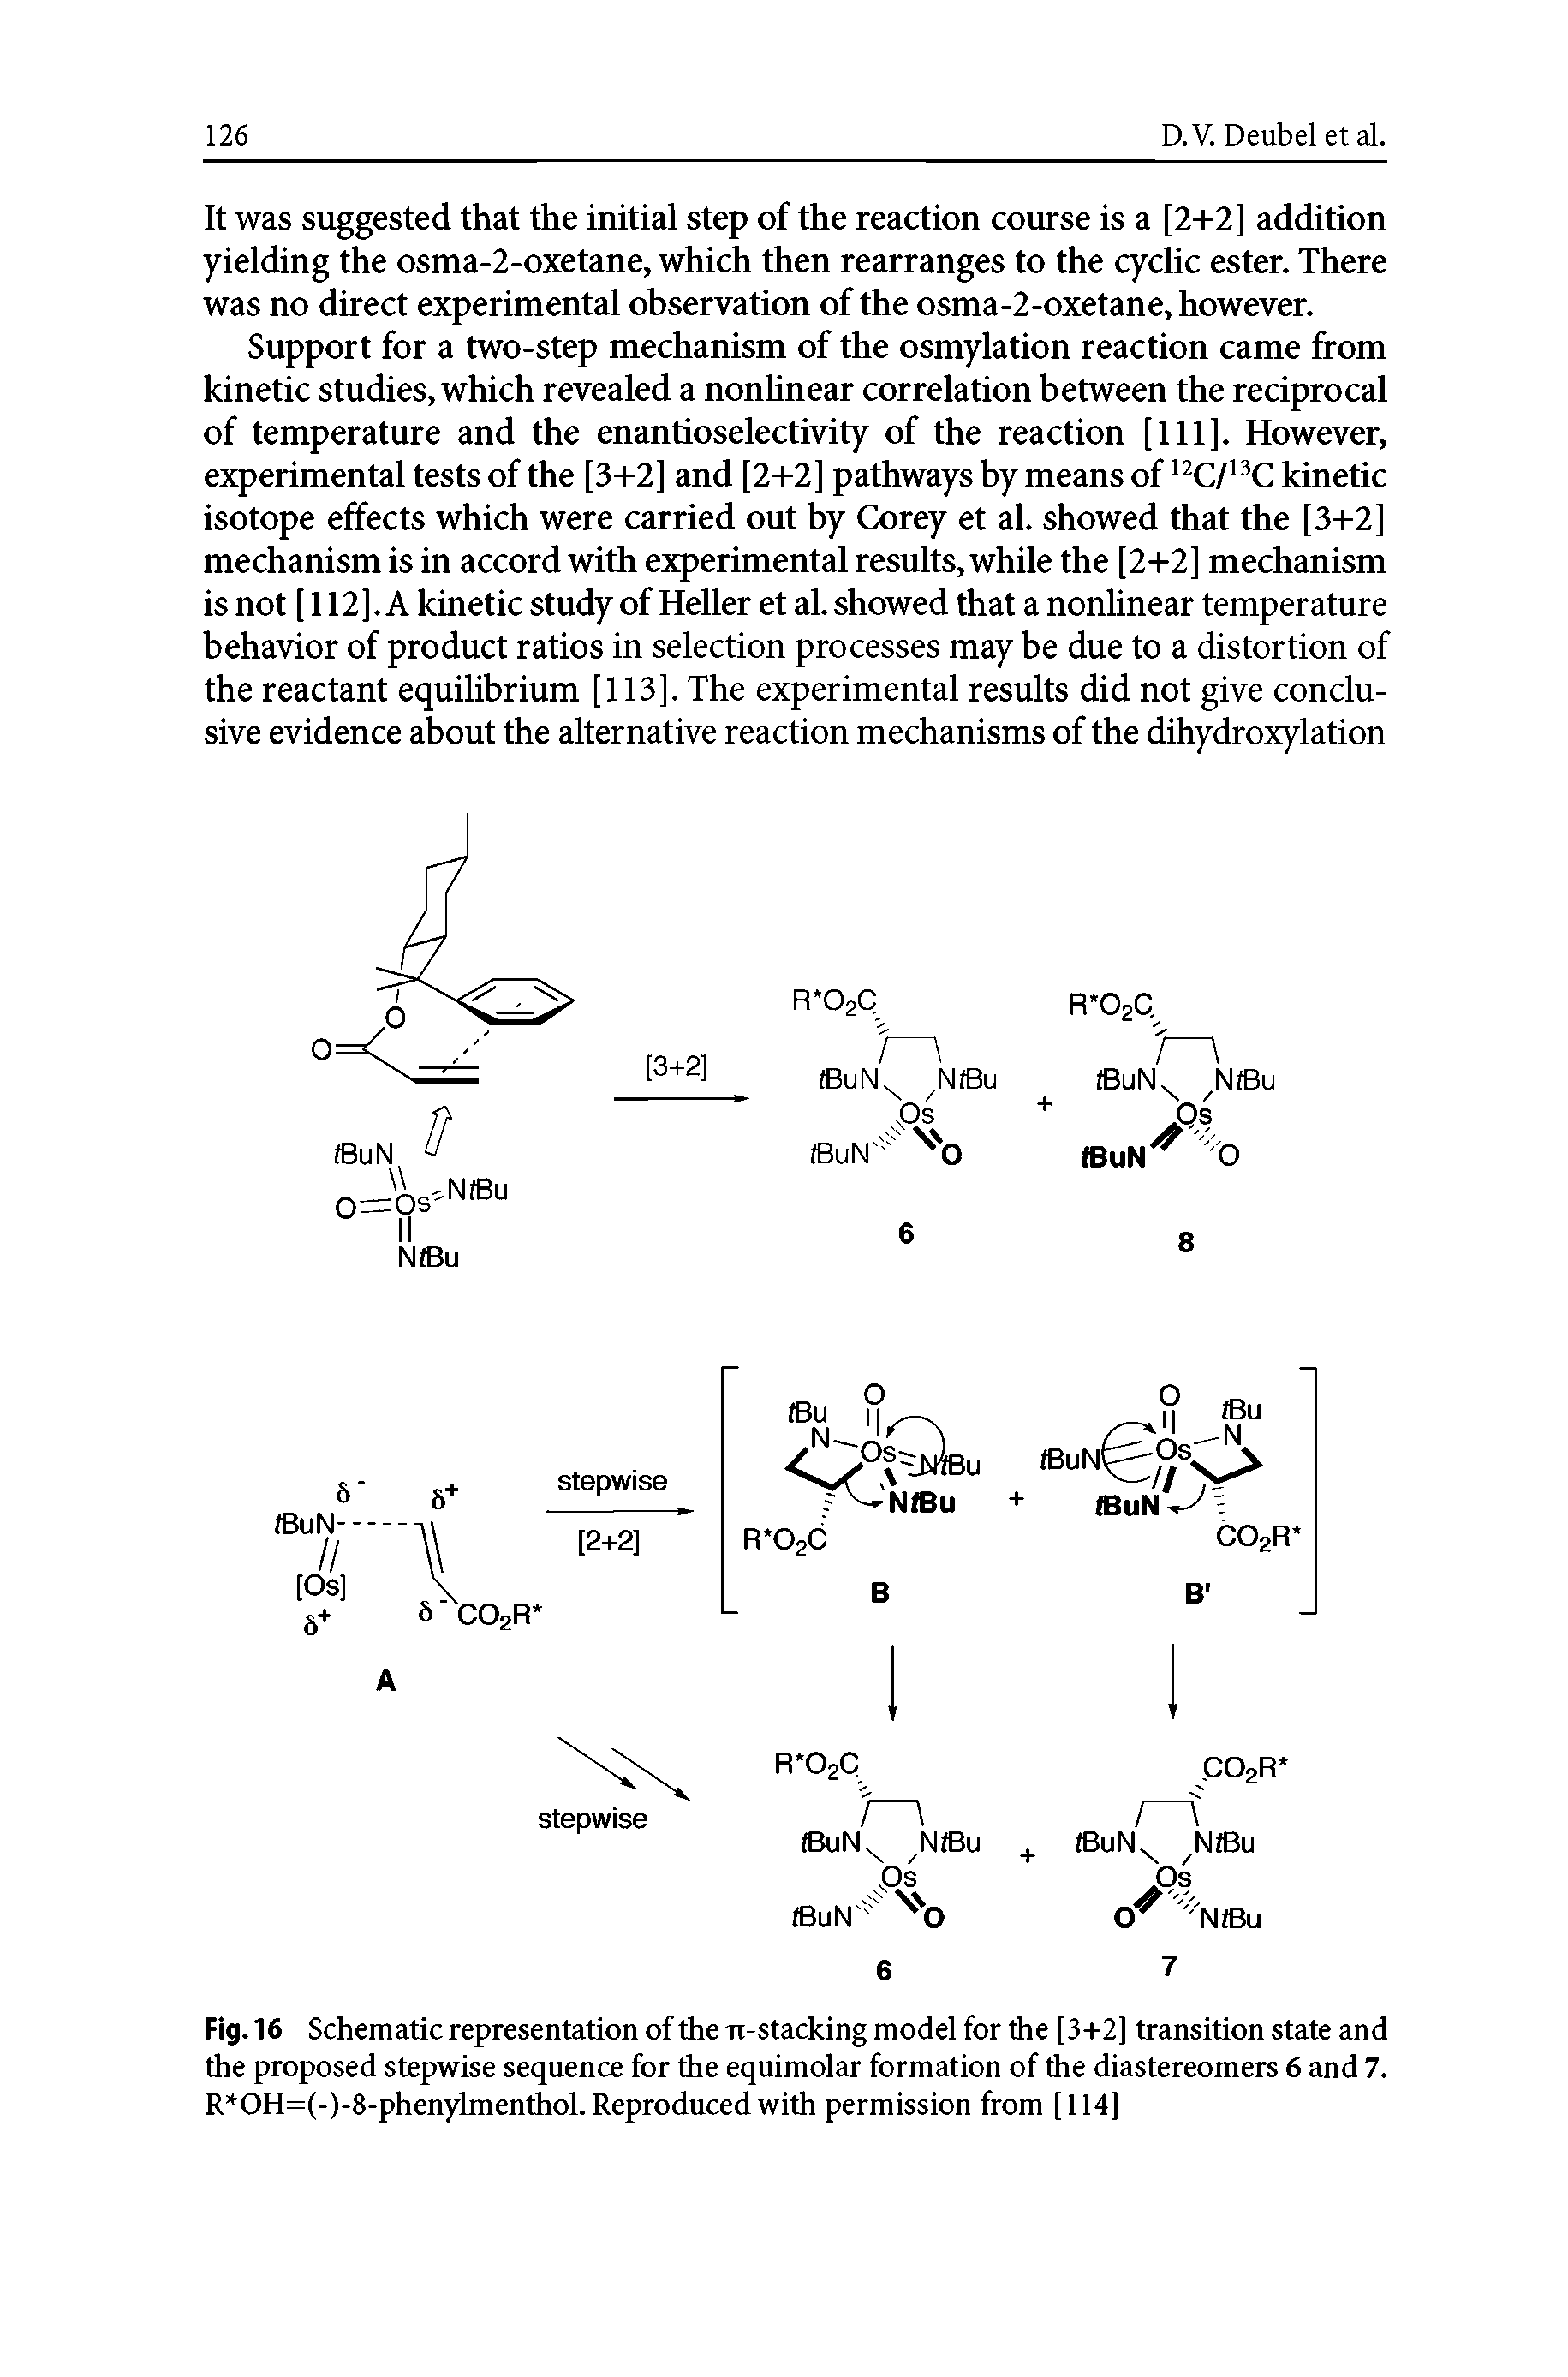 Fig. 16 Schematic representation of the n-stacking model for the [3+2] transition state and the proposed stepwise sequence for the equimolar formation of the diastereomers 6 and 7. R OH=(-)-8-phenylmenthol. Reproduced with permission from [114]...